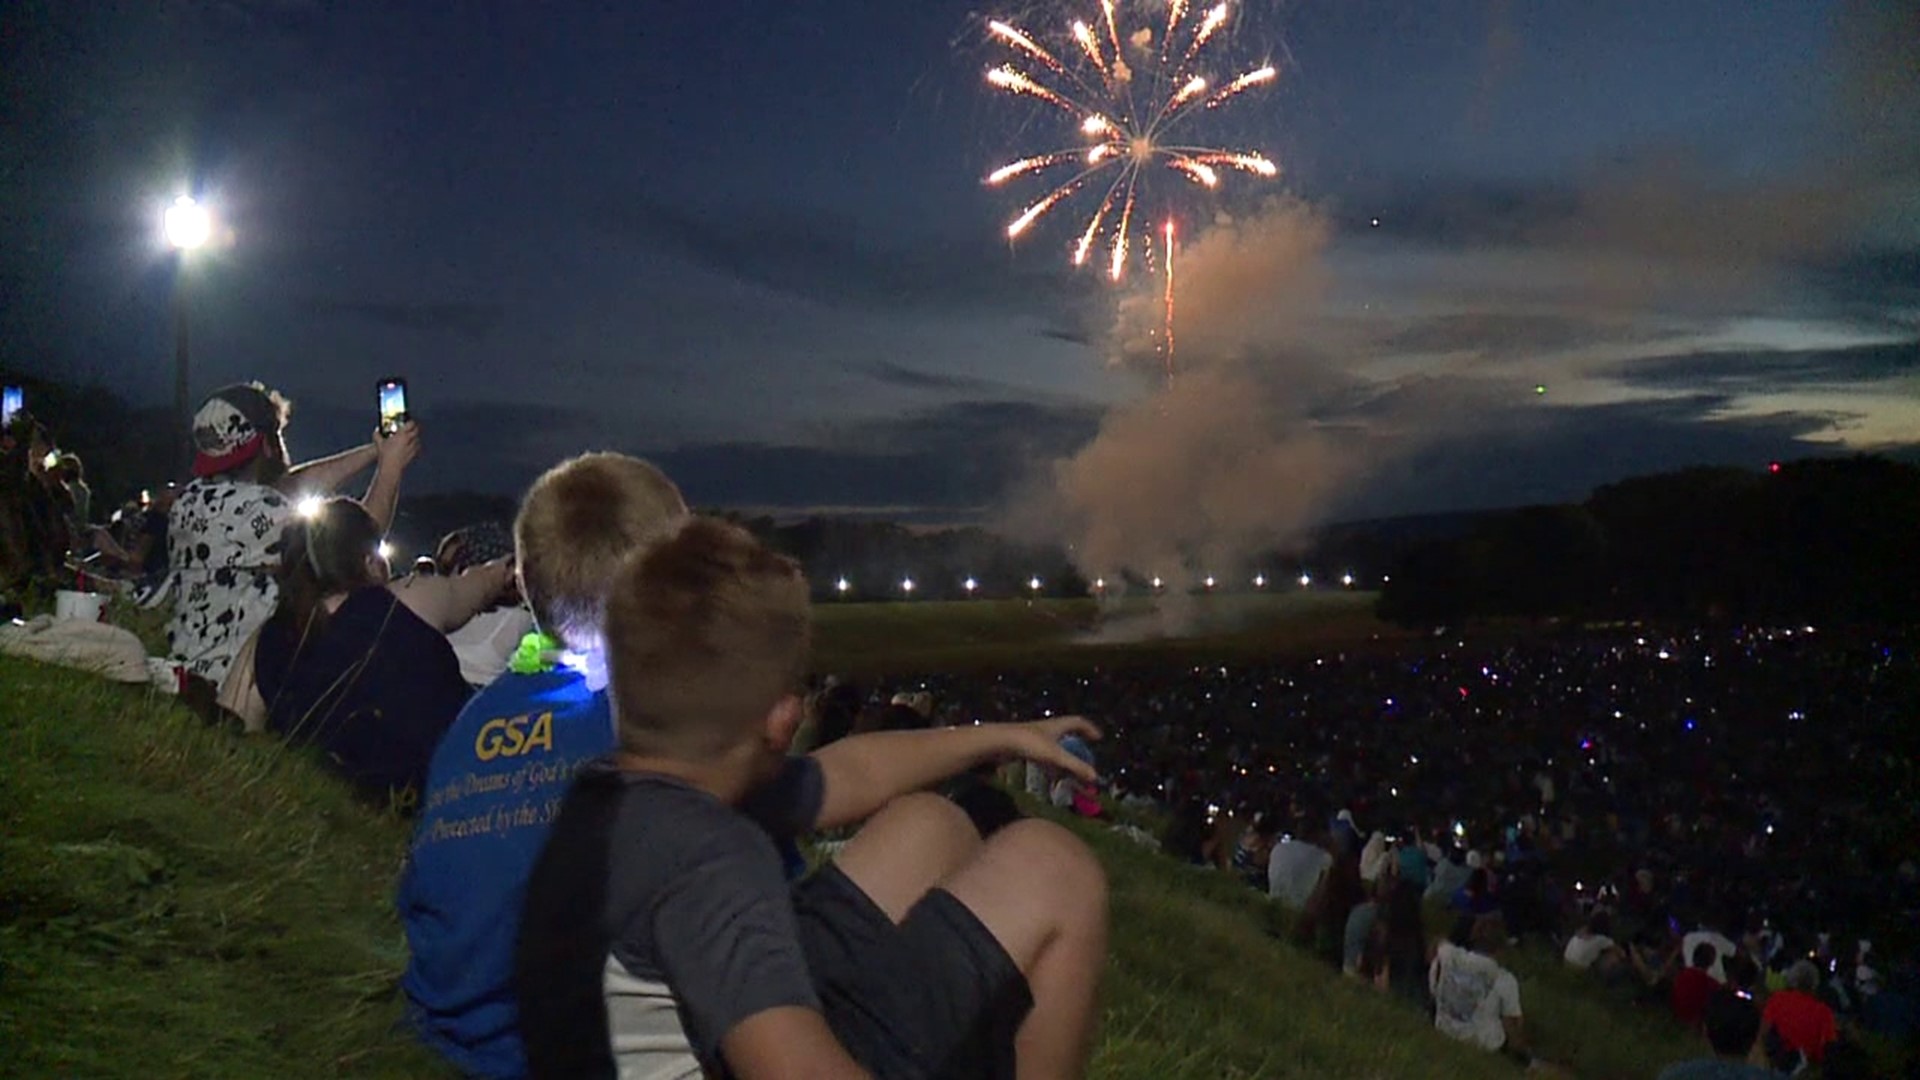 Wilkes-Barre's Kirby Park was once again host to one of the largest Independence Day gatherings.